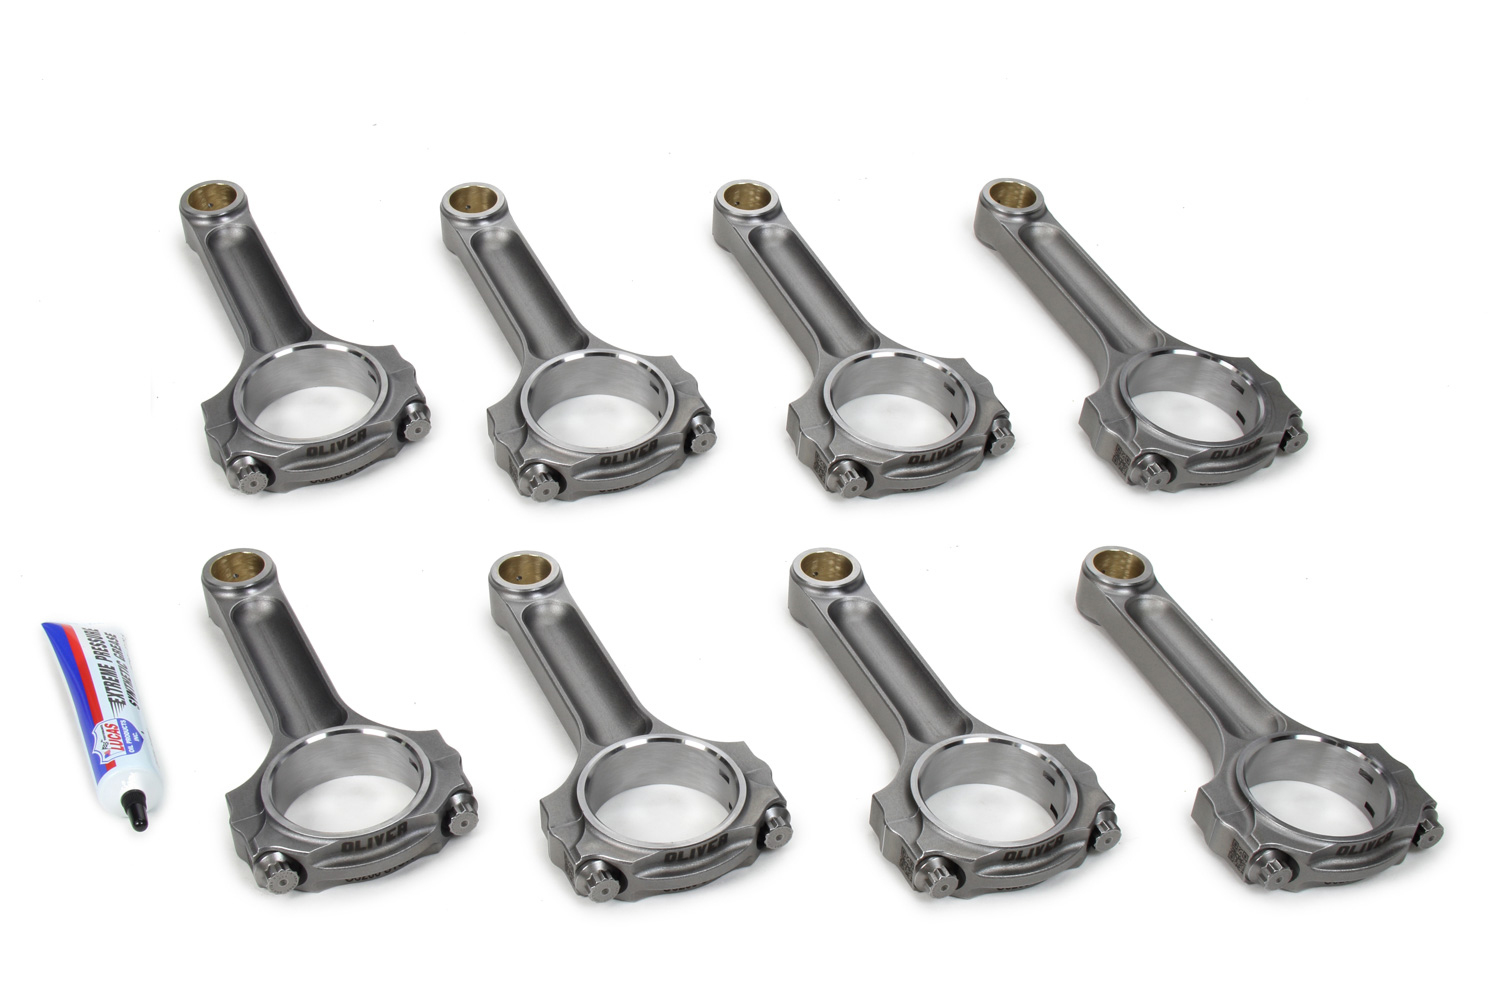 Oliver Rods C6000SMLT8 - Connecting Rod, Standard Light, I Beam, 6.000 in Long, Bushed, 7/16 in Cap Screws, Forged Steel, Small Block Chevy, Set of 8